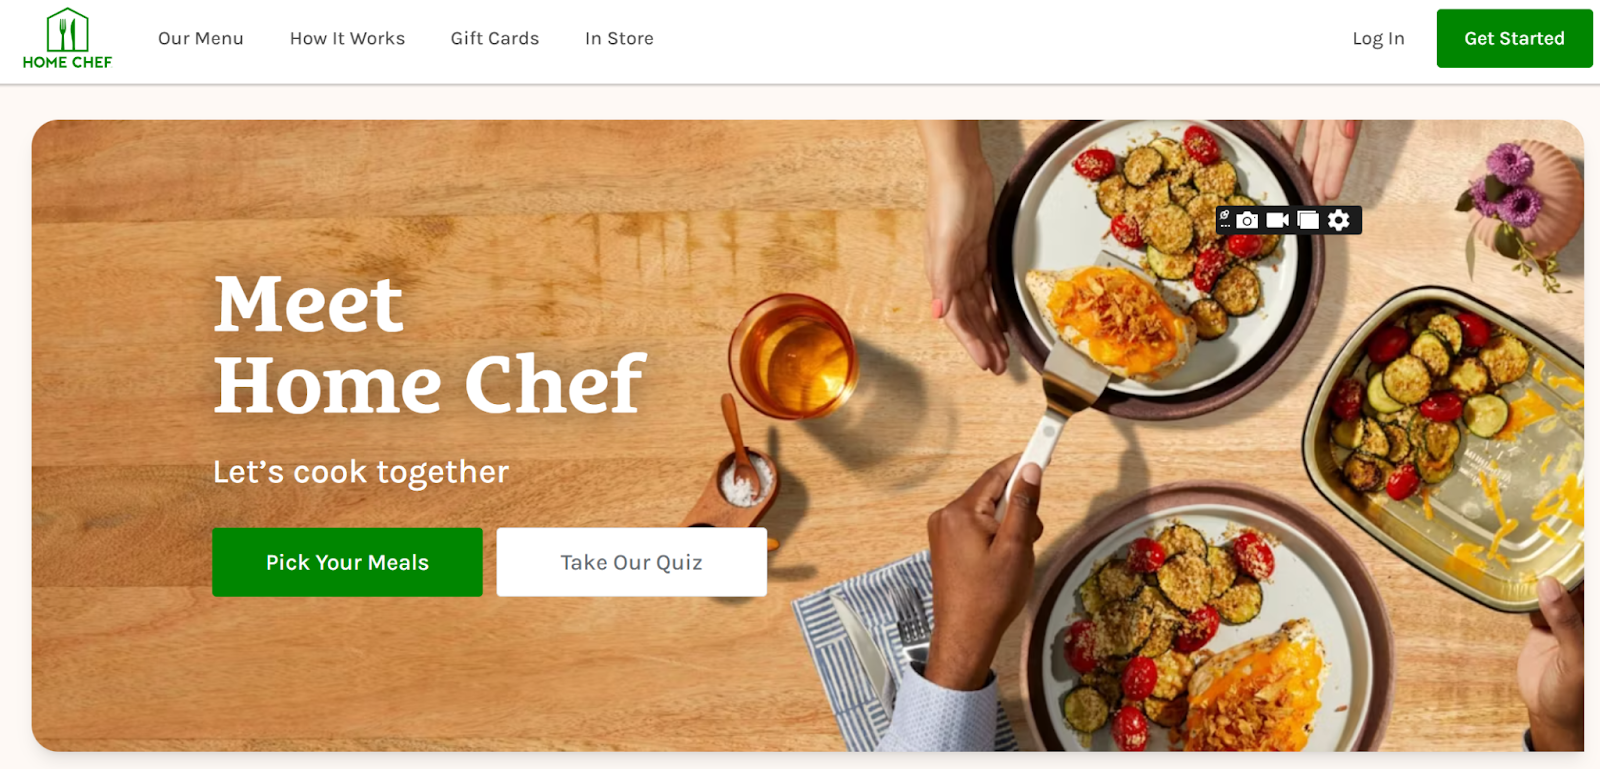 Home chef website homepage